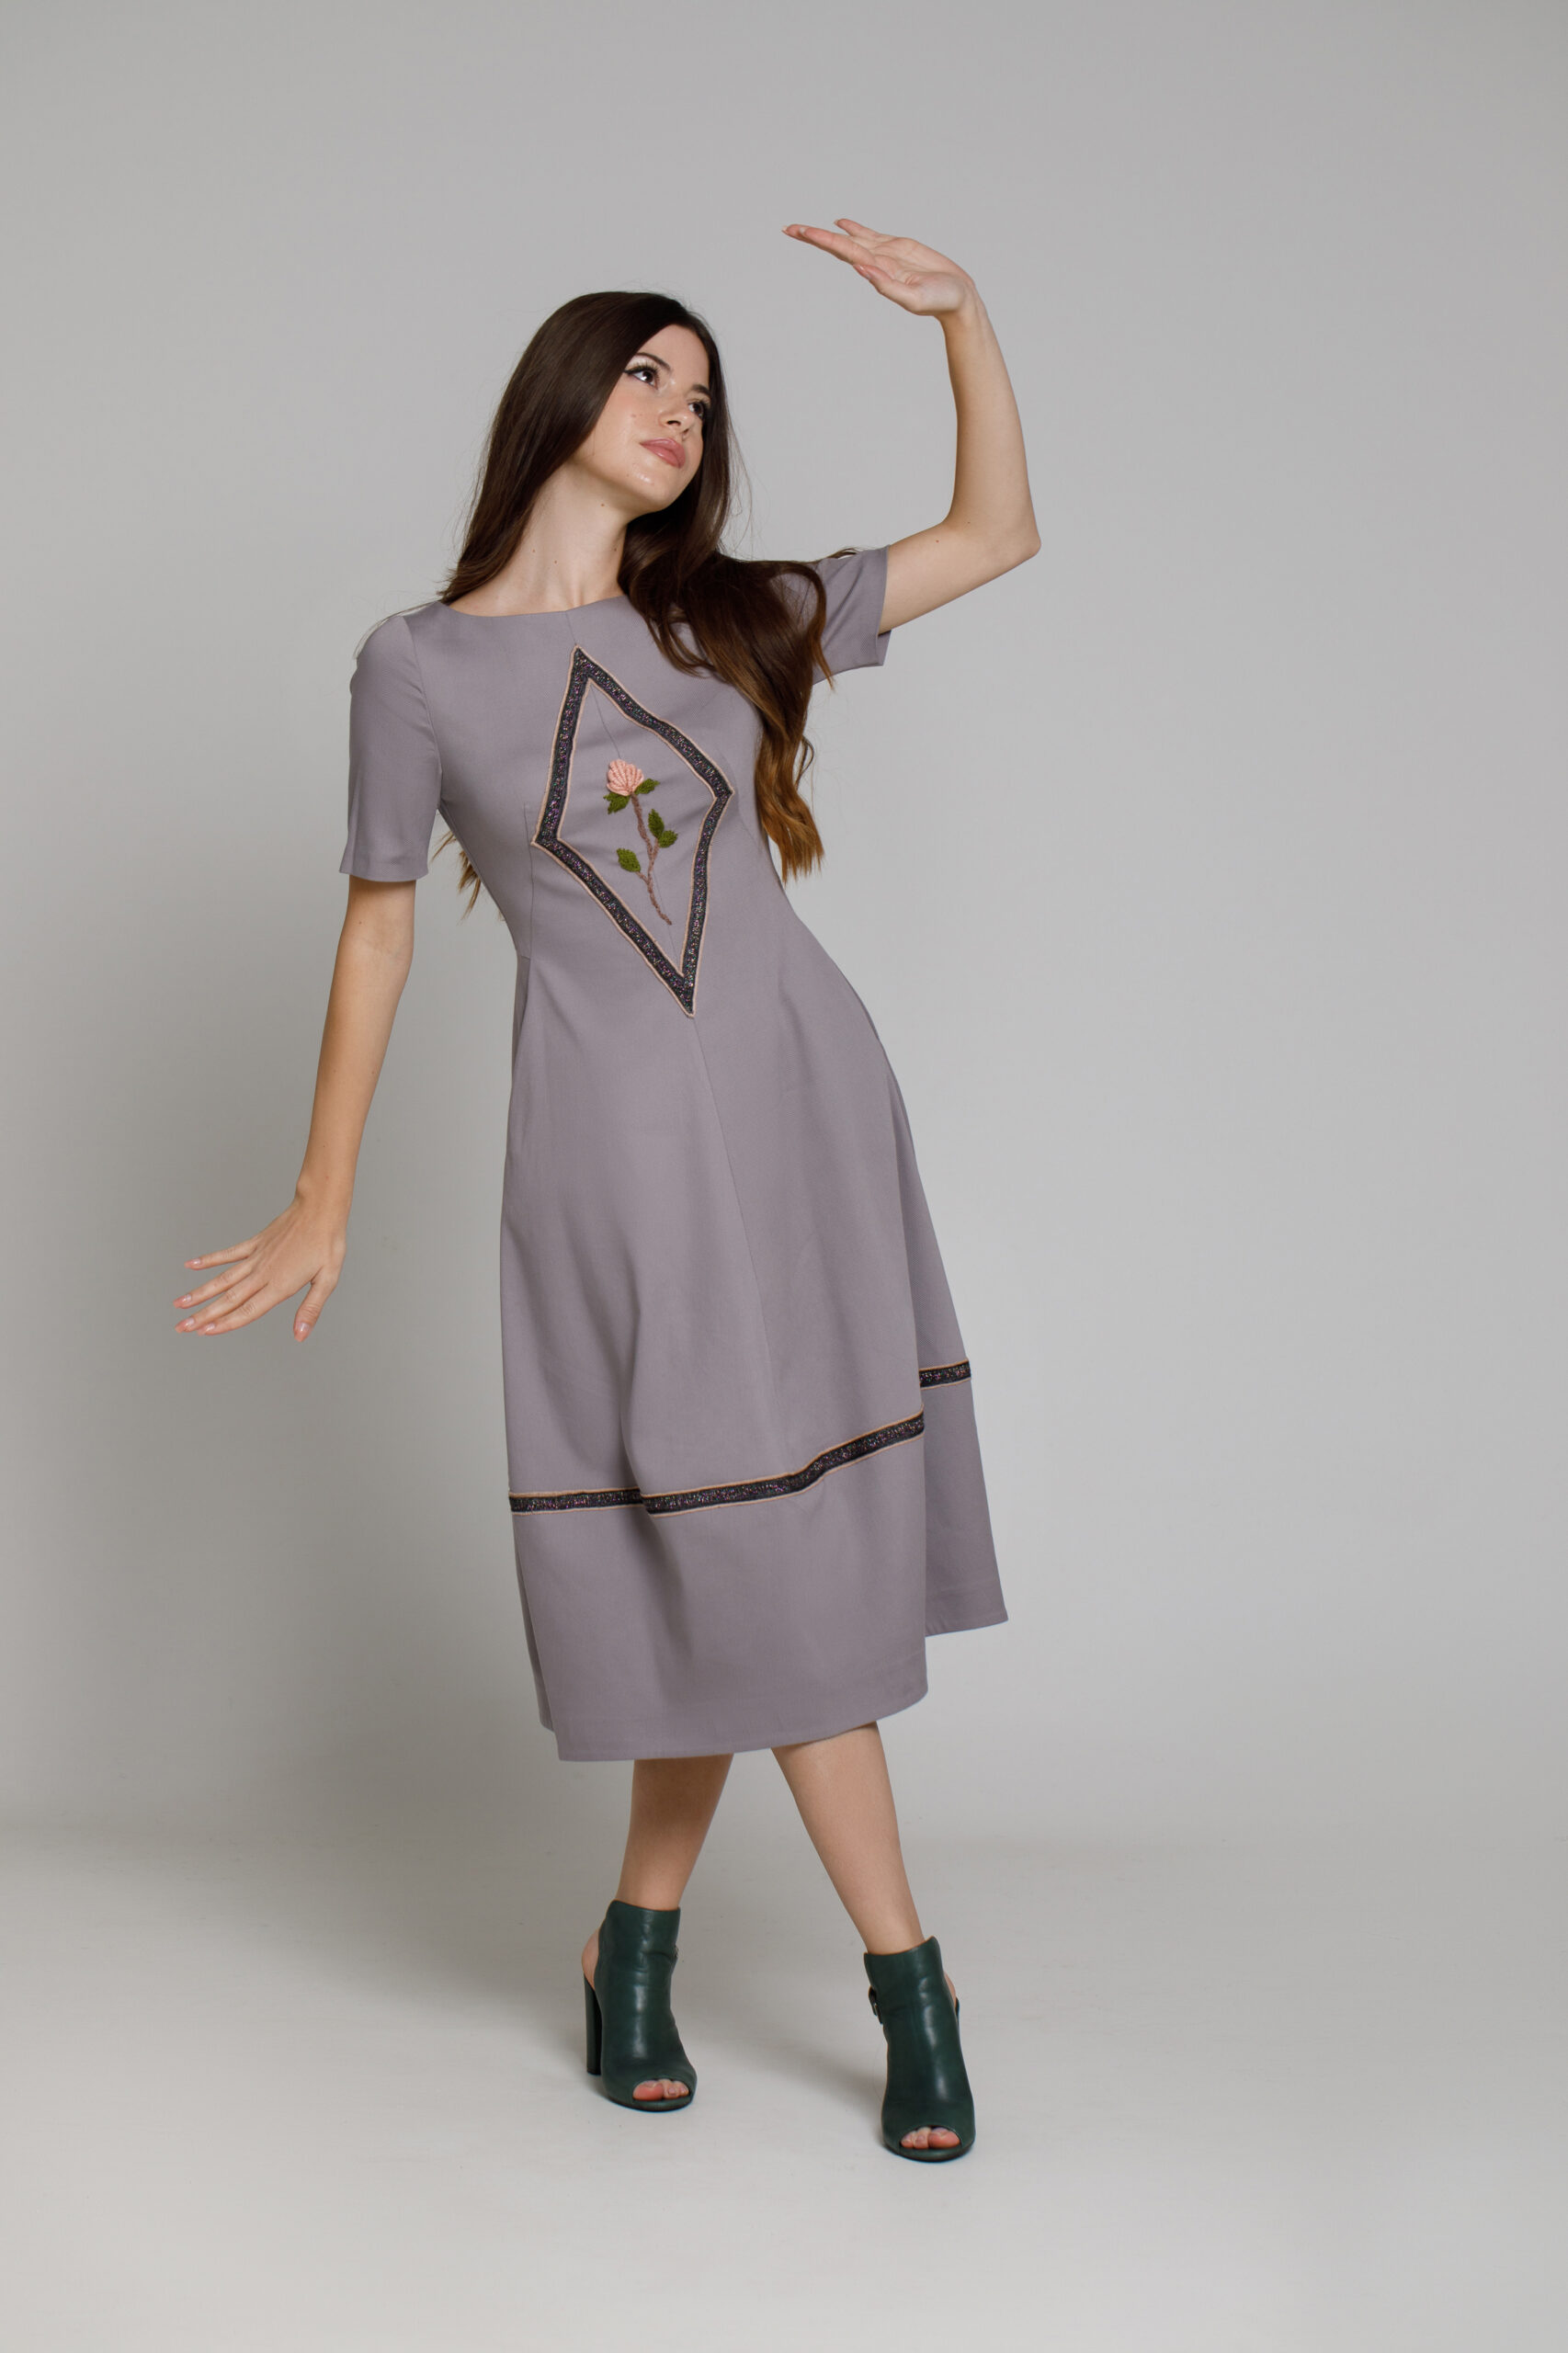 IMMA Gray dress with floral embroidery. Natural fabrics, original design, handmade embroidery